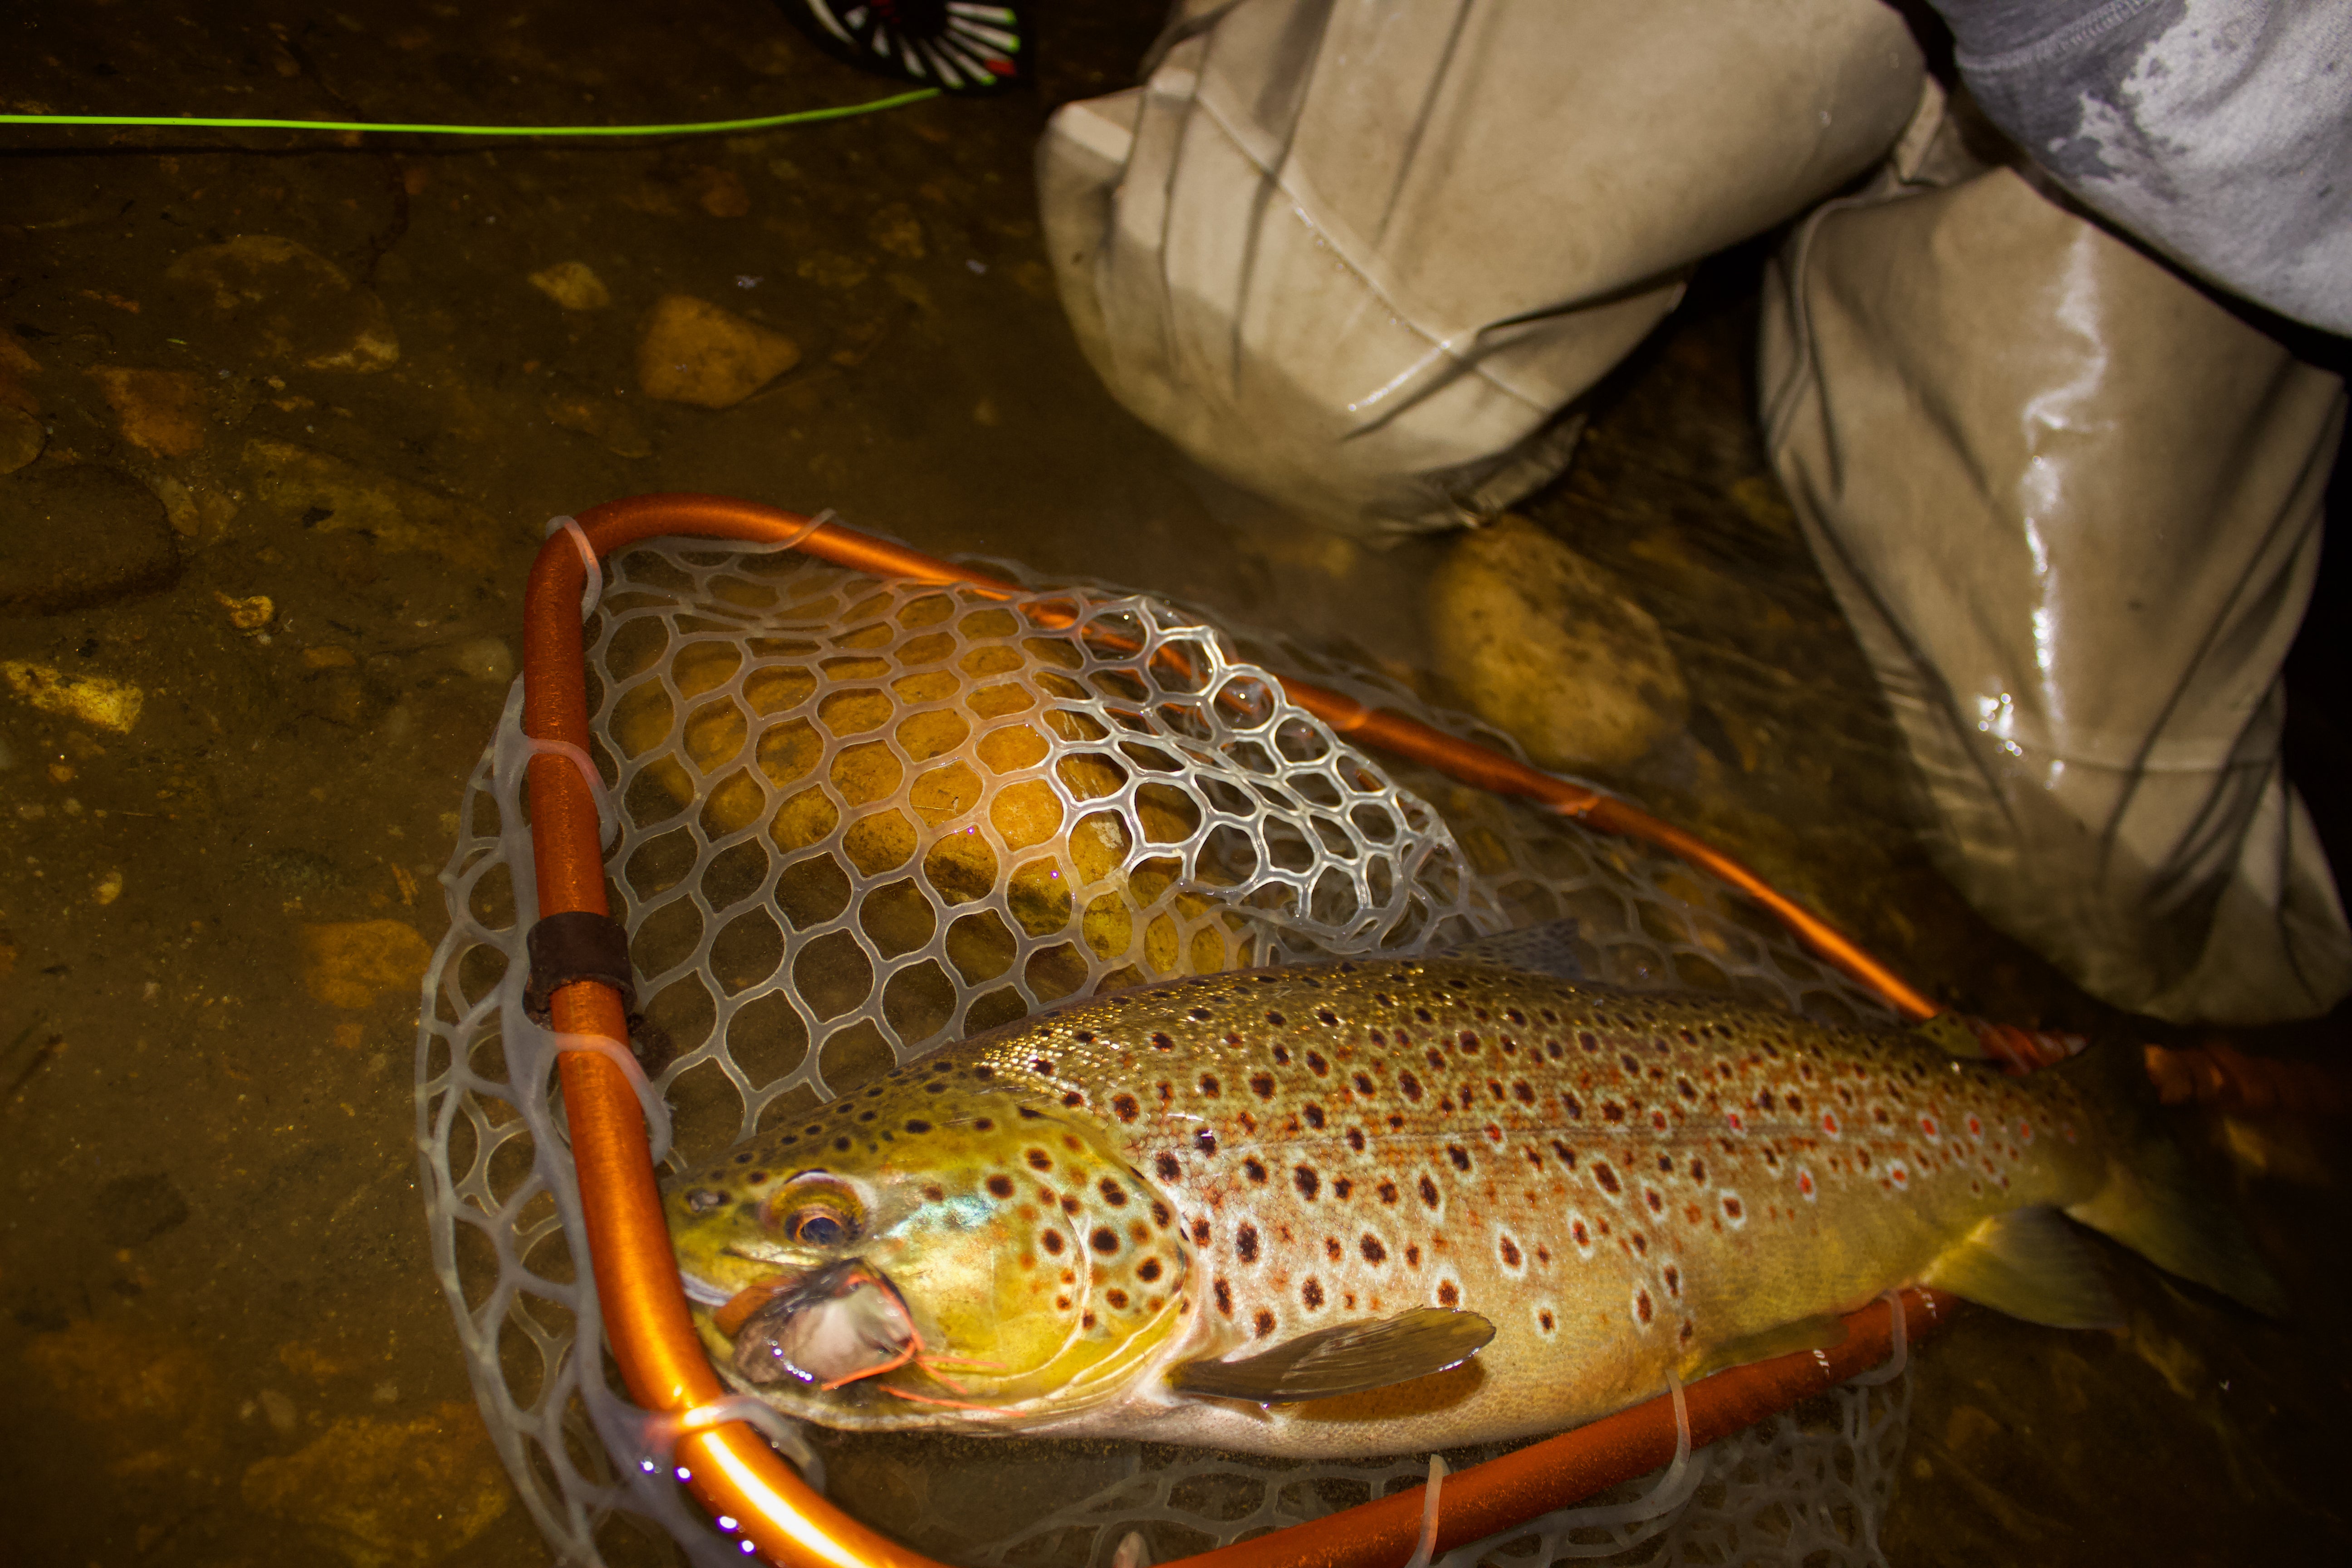 How To Trout Fish Bait In Creeks & Rivers. In DEPTH TROUT FISHING Tips. 